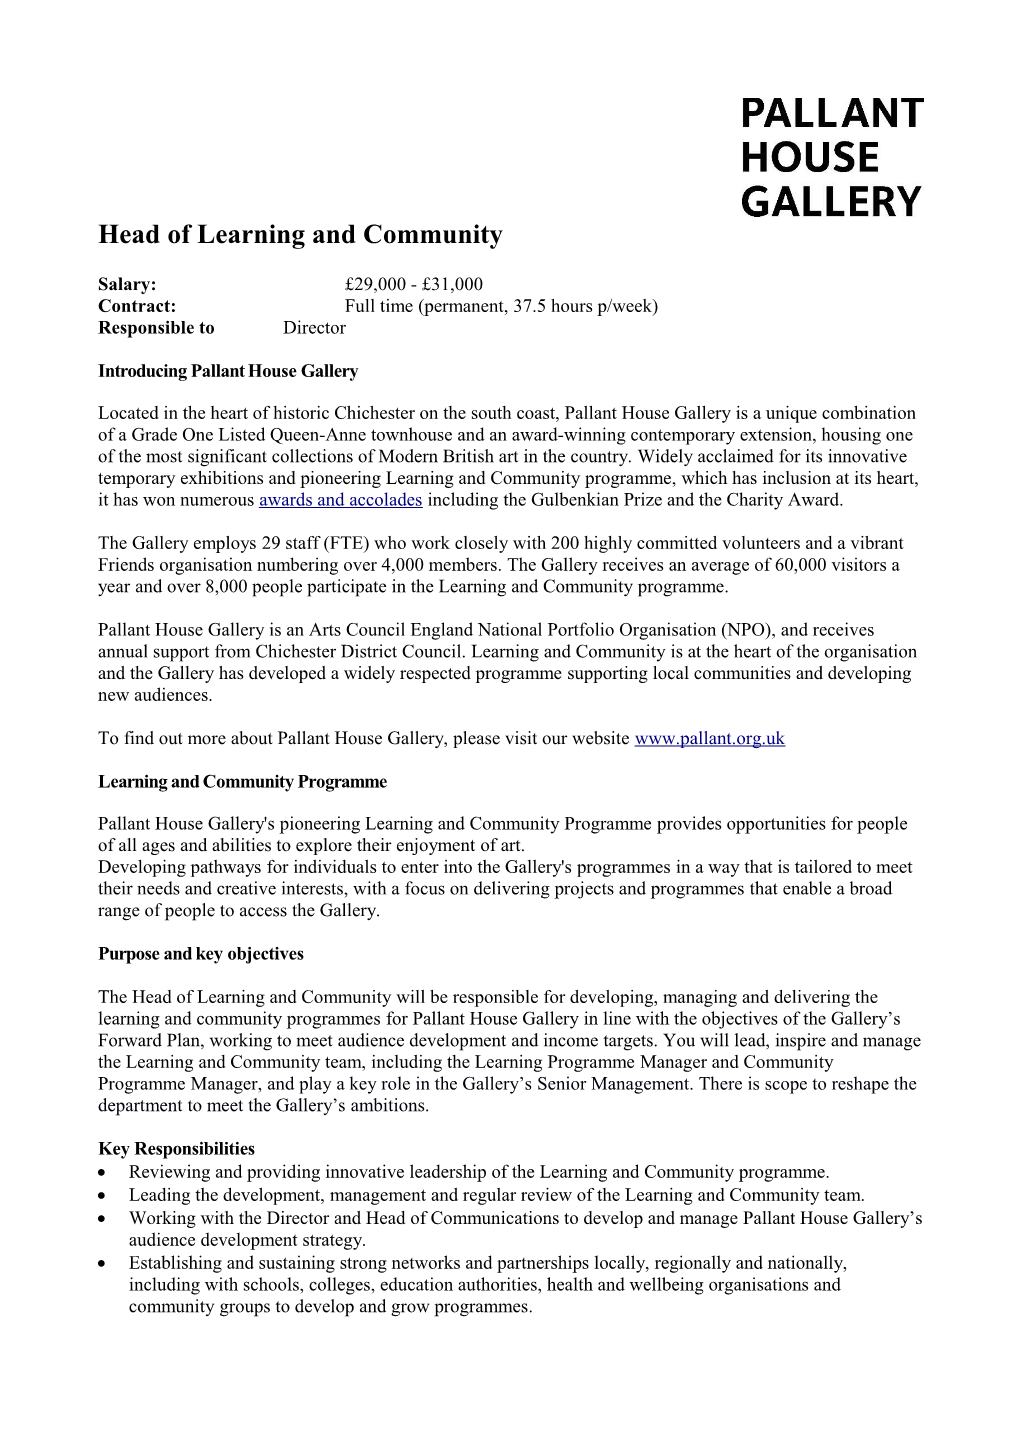 Head of Learning and Community